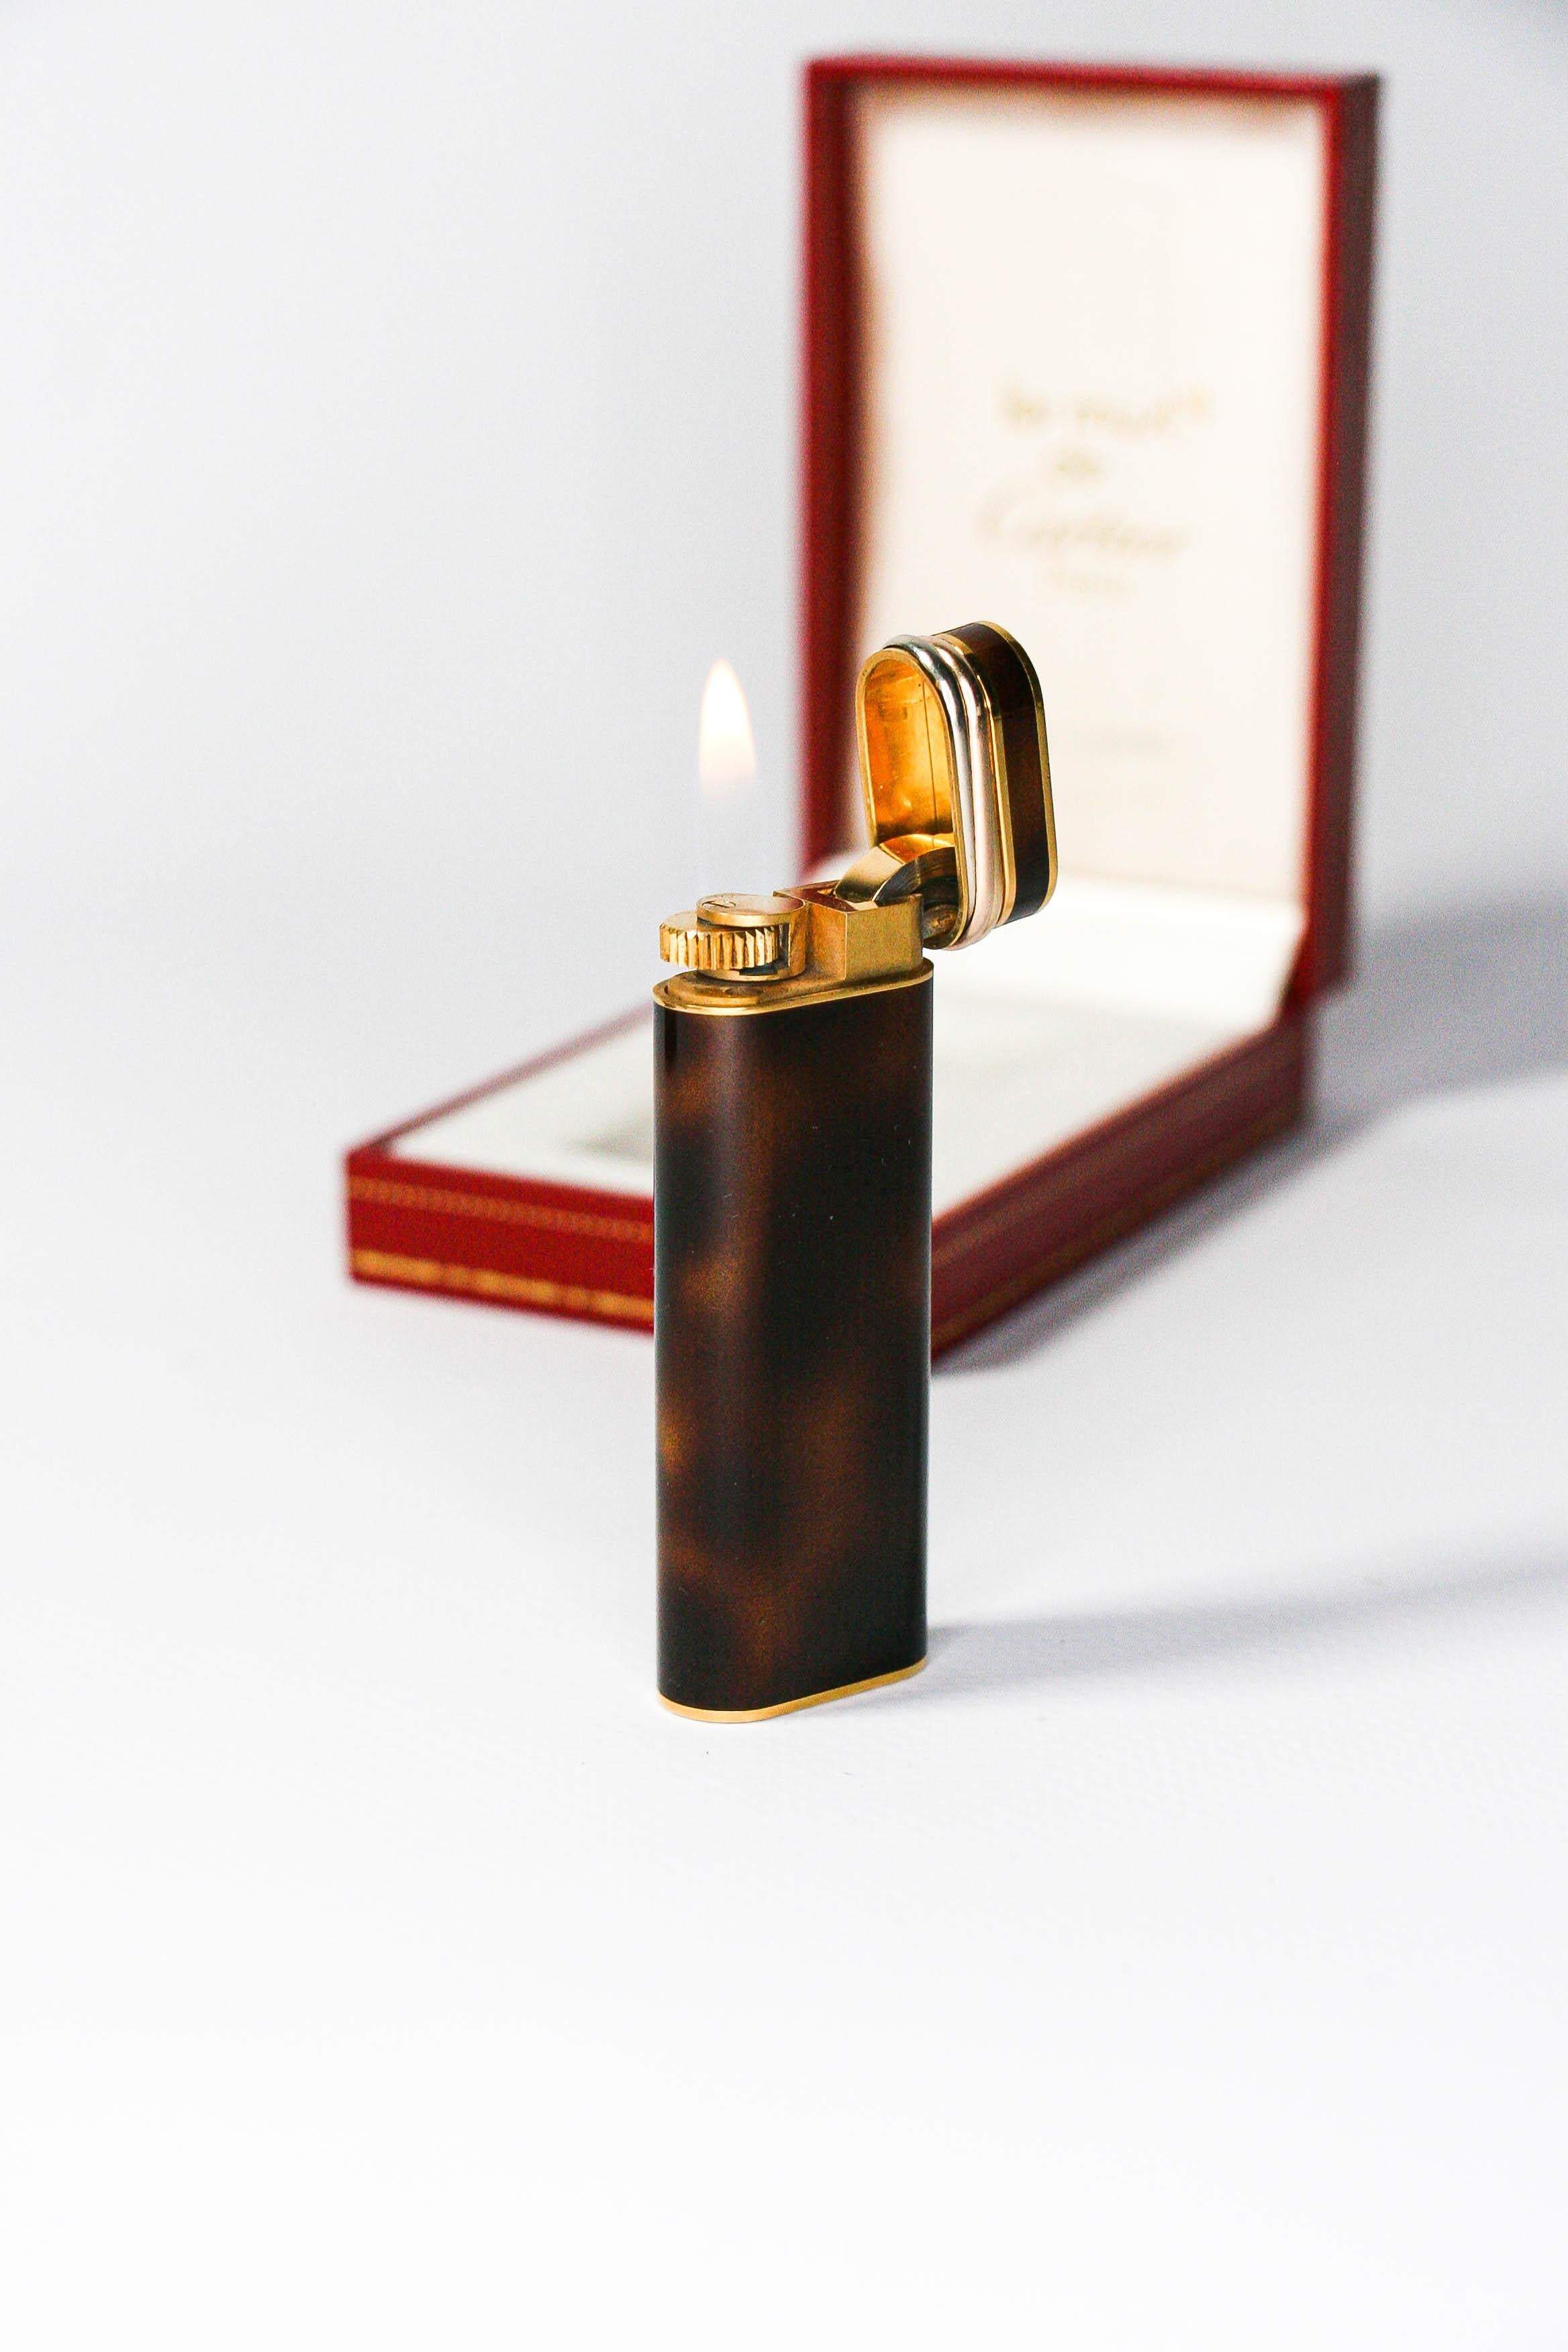 Vintage Cartier Les Must Trinity lighter Gold Plated with Tortoiseshell Laquer 1